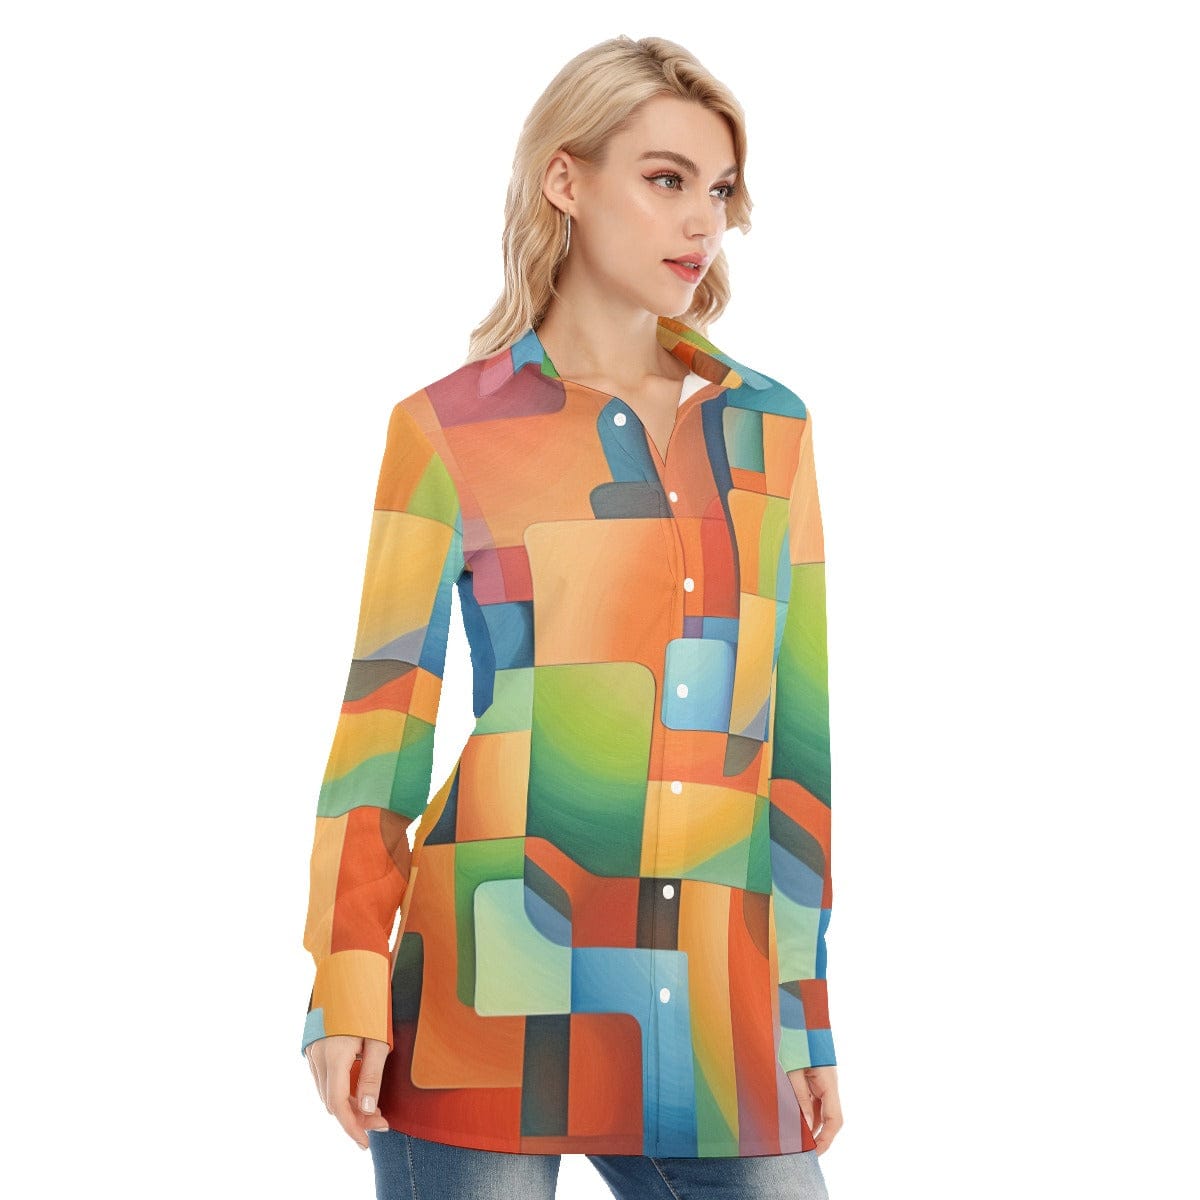 3R9ER All-Over Print Women's Long Shirt |115GSM 98% Cotton and 2% spandex